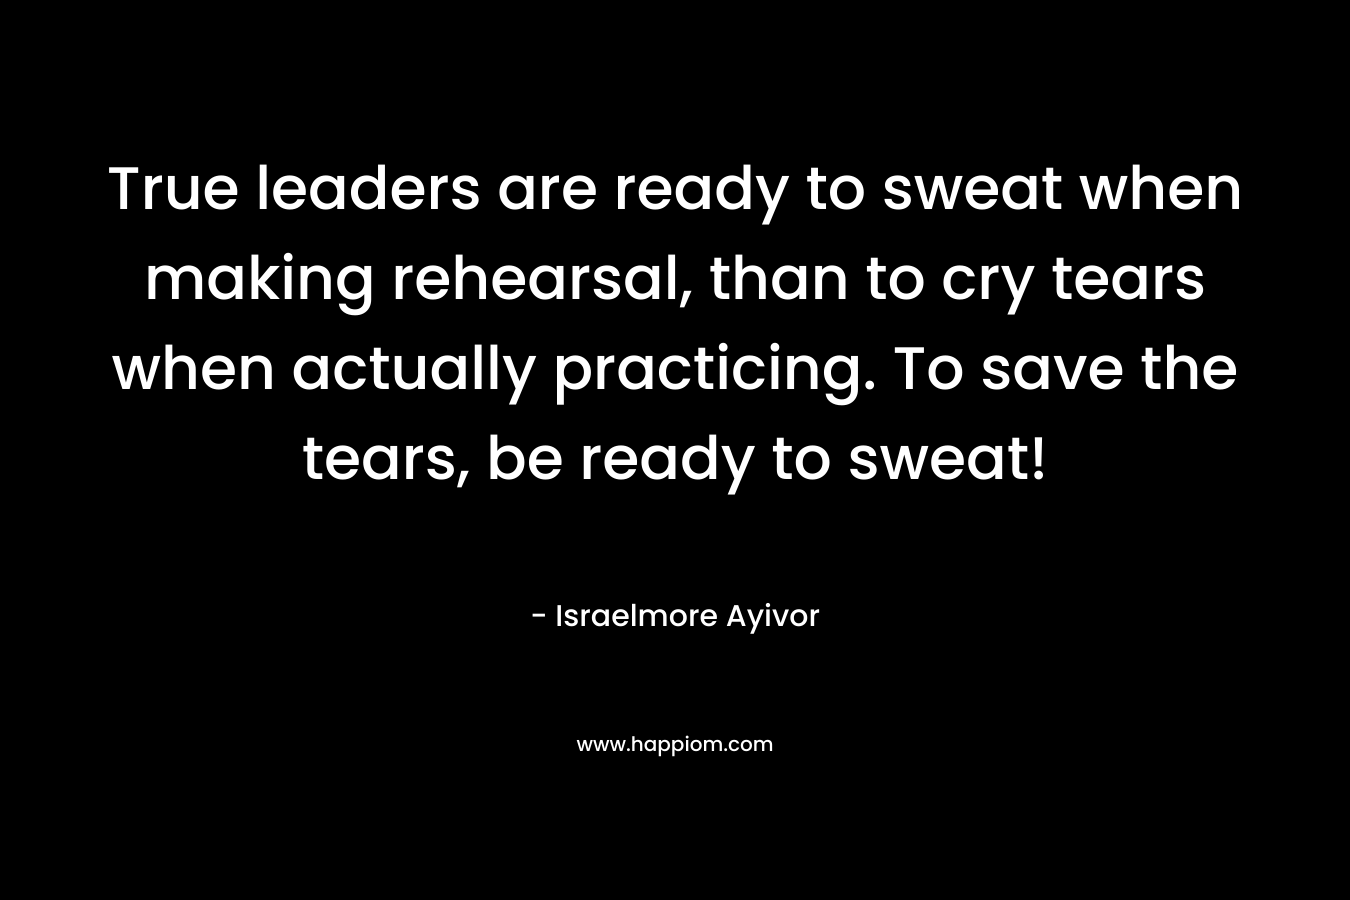 True leaders are ready to sweat when making rehearsal, than to cry tears when actually practicing. To save the tears, be ready to sweat!